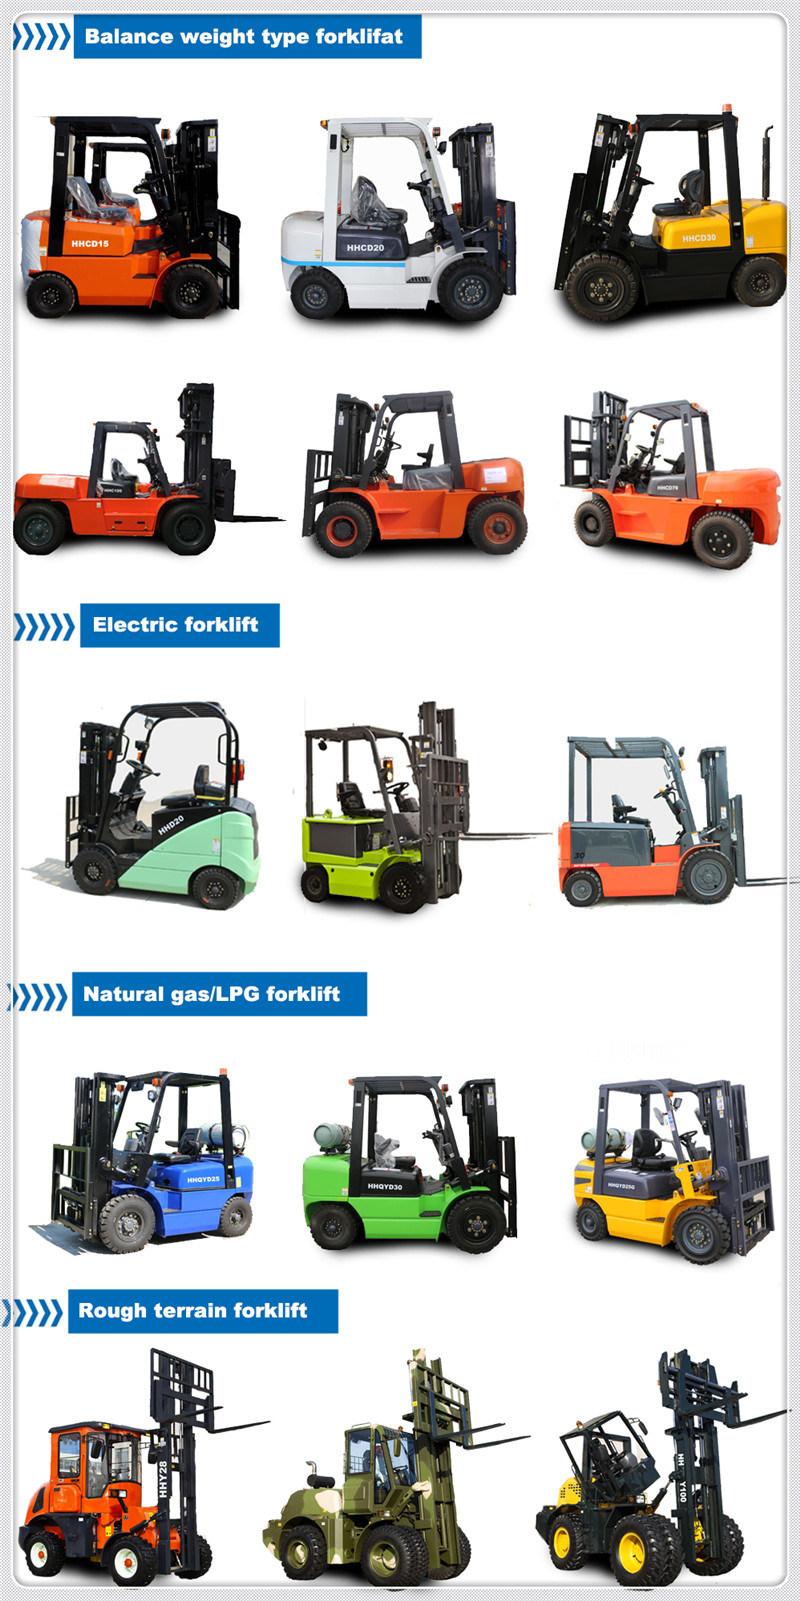 Manual Hydraulic Forklift for Sale